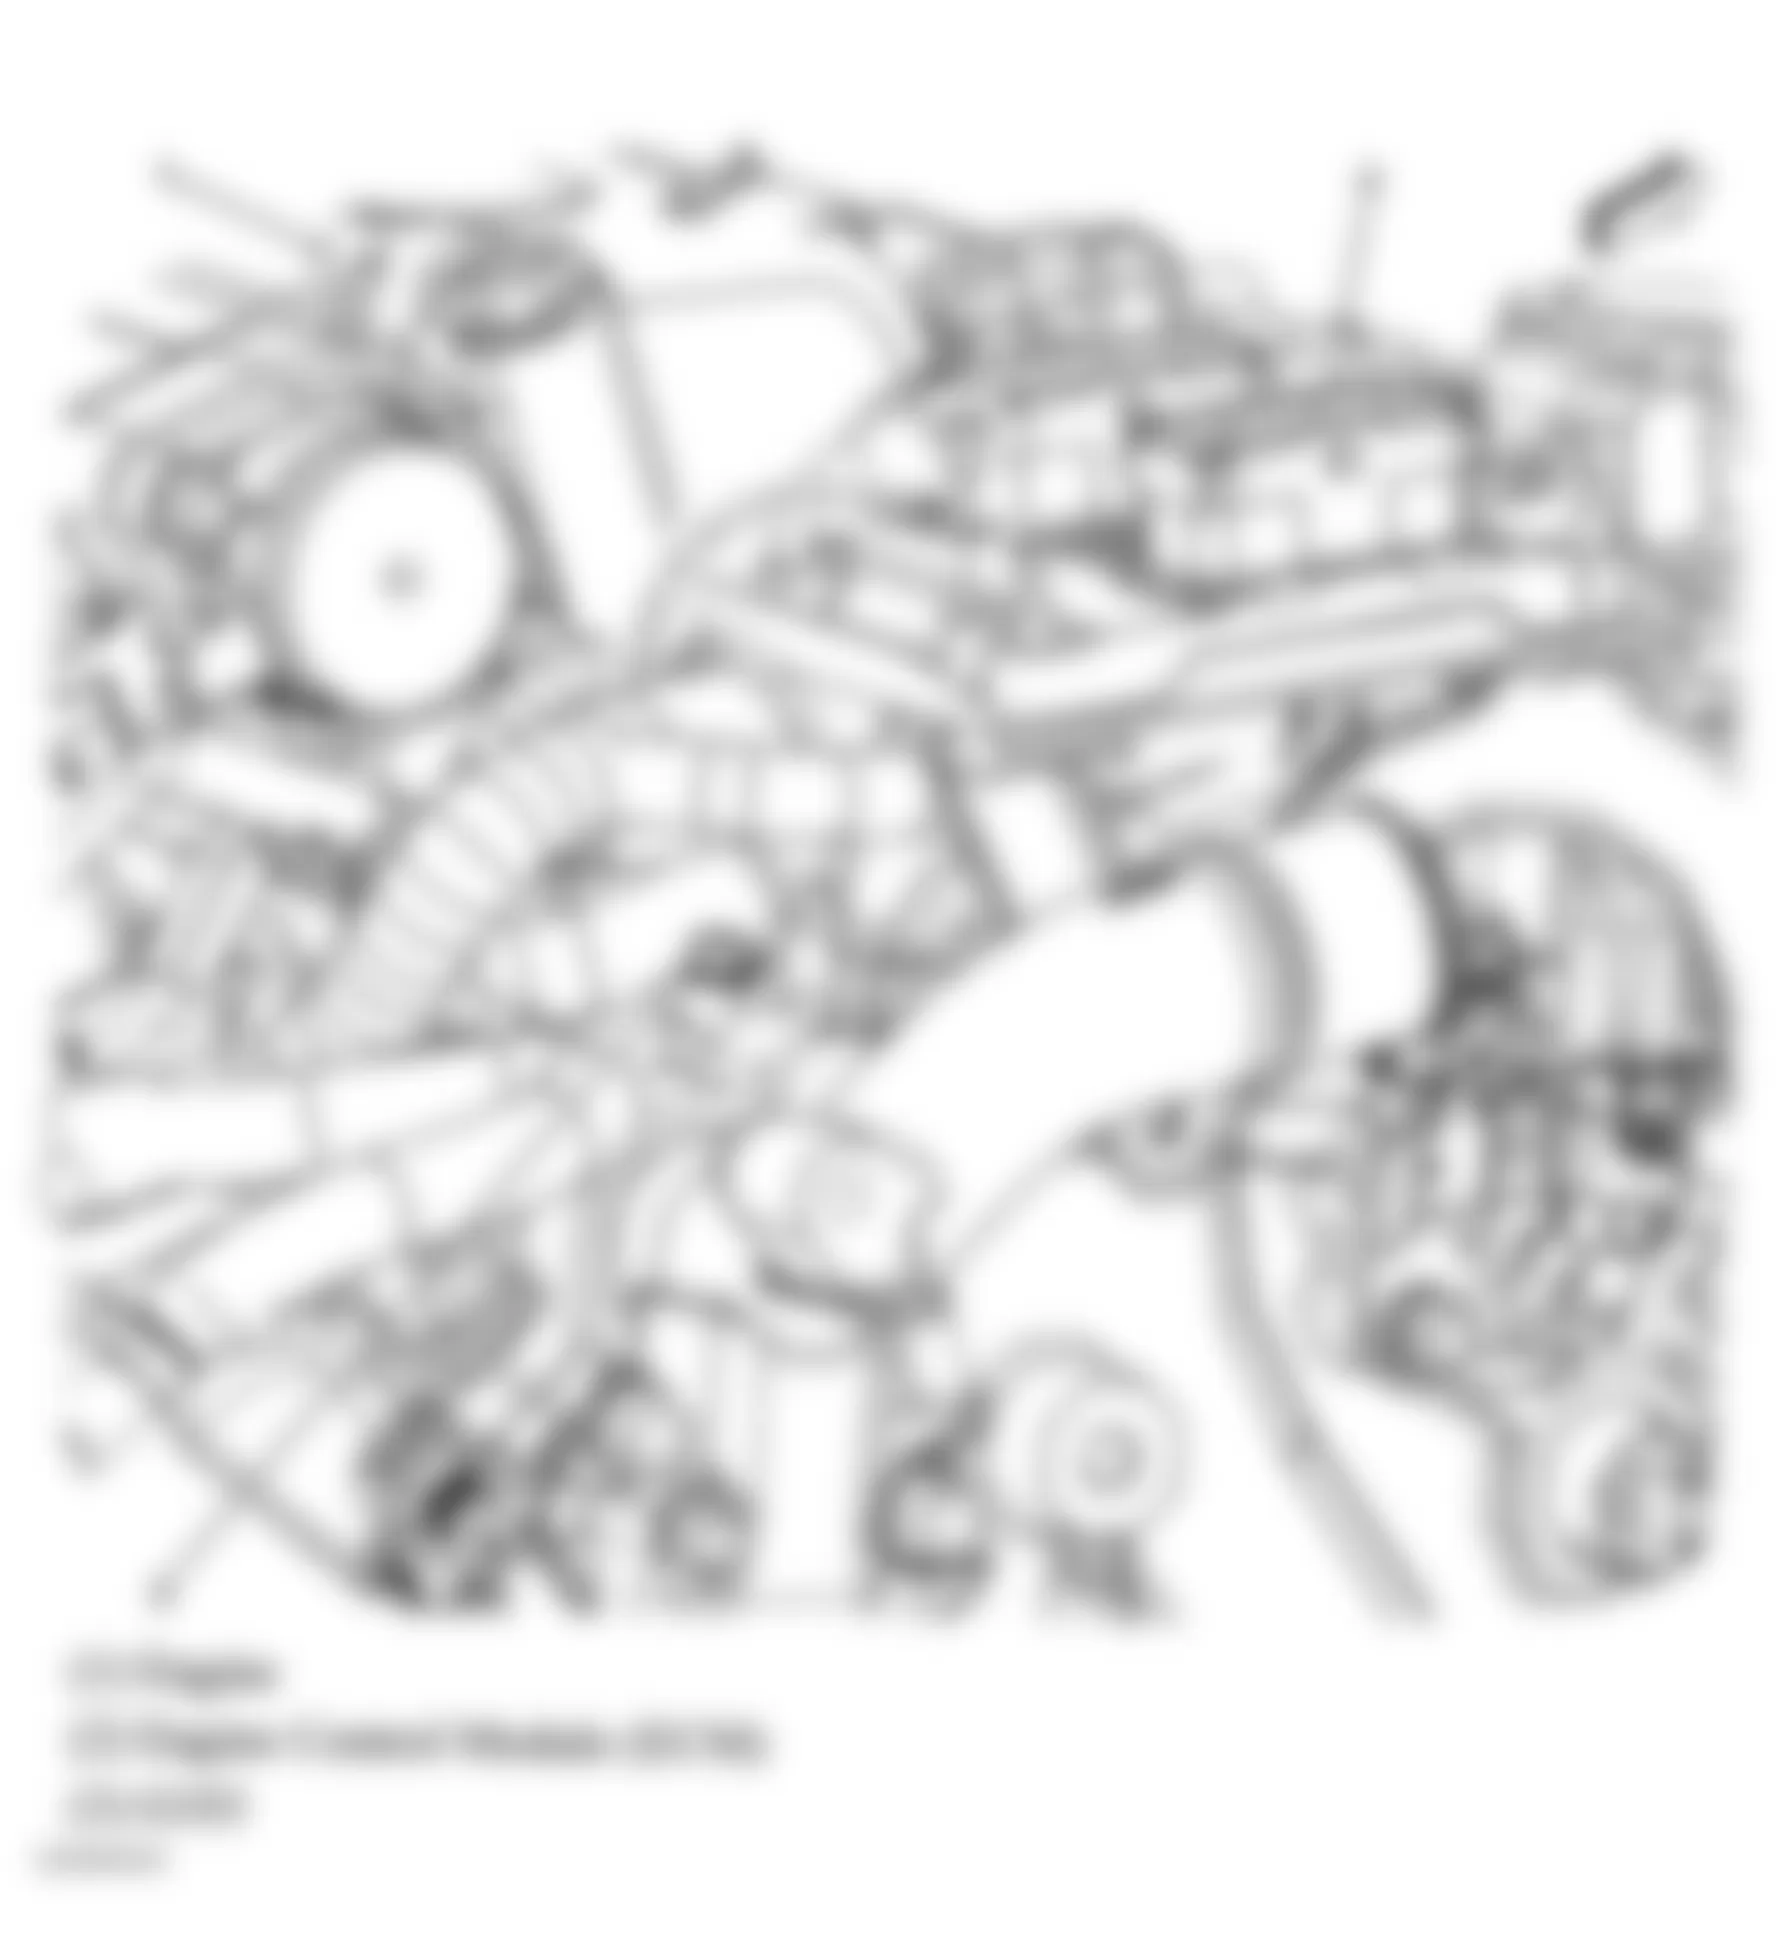 Buick Allure CX 2008 - Component Locations -  Engine Assembly (3.6L)